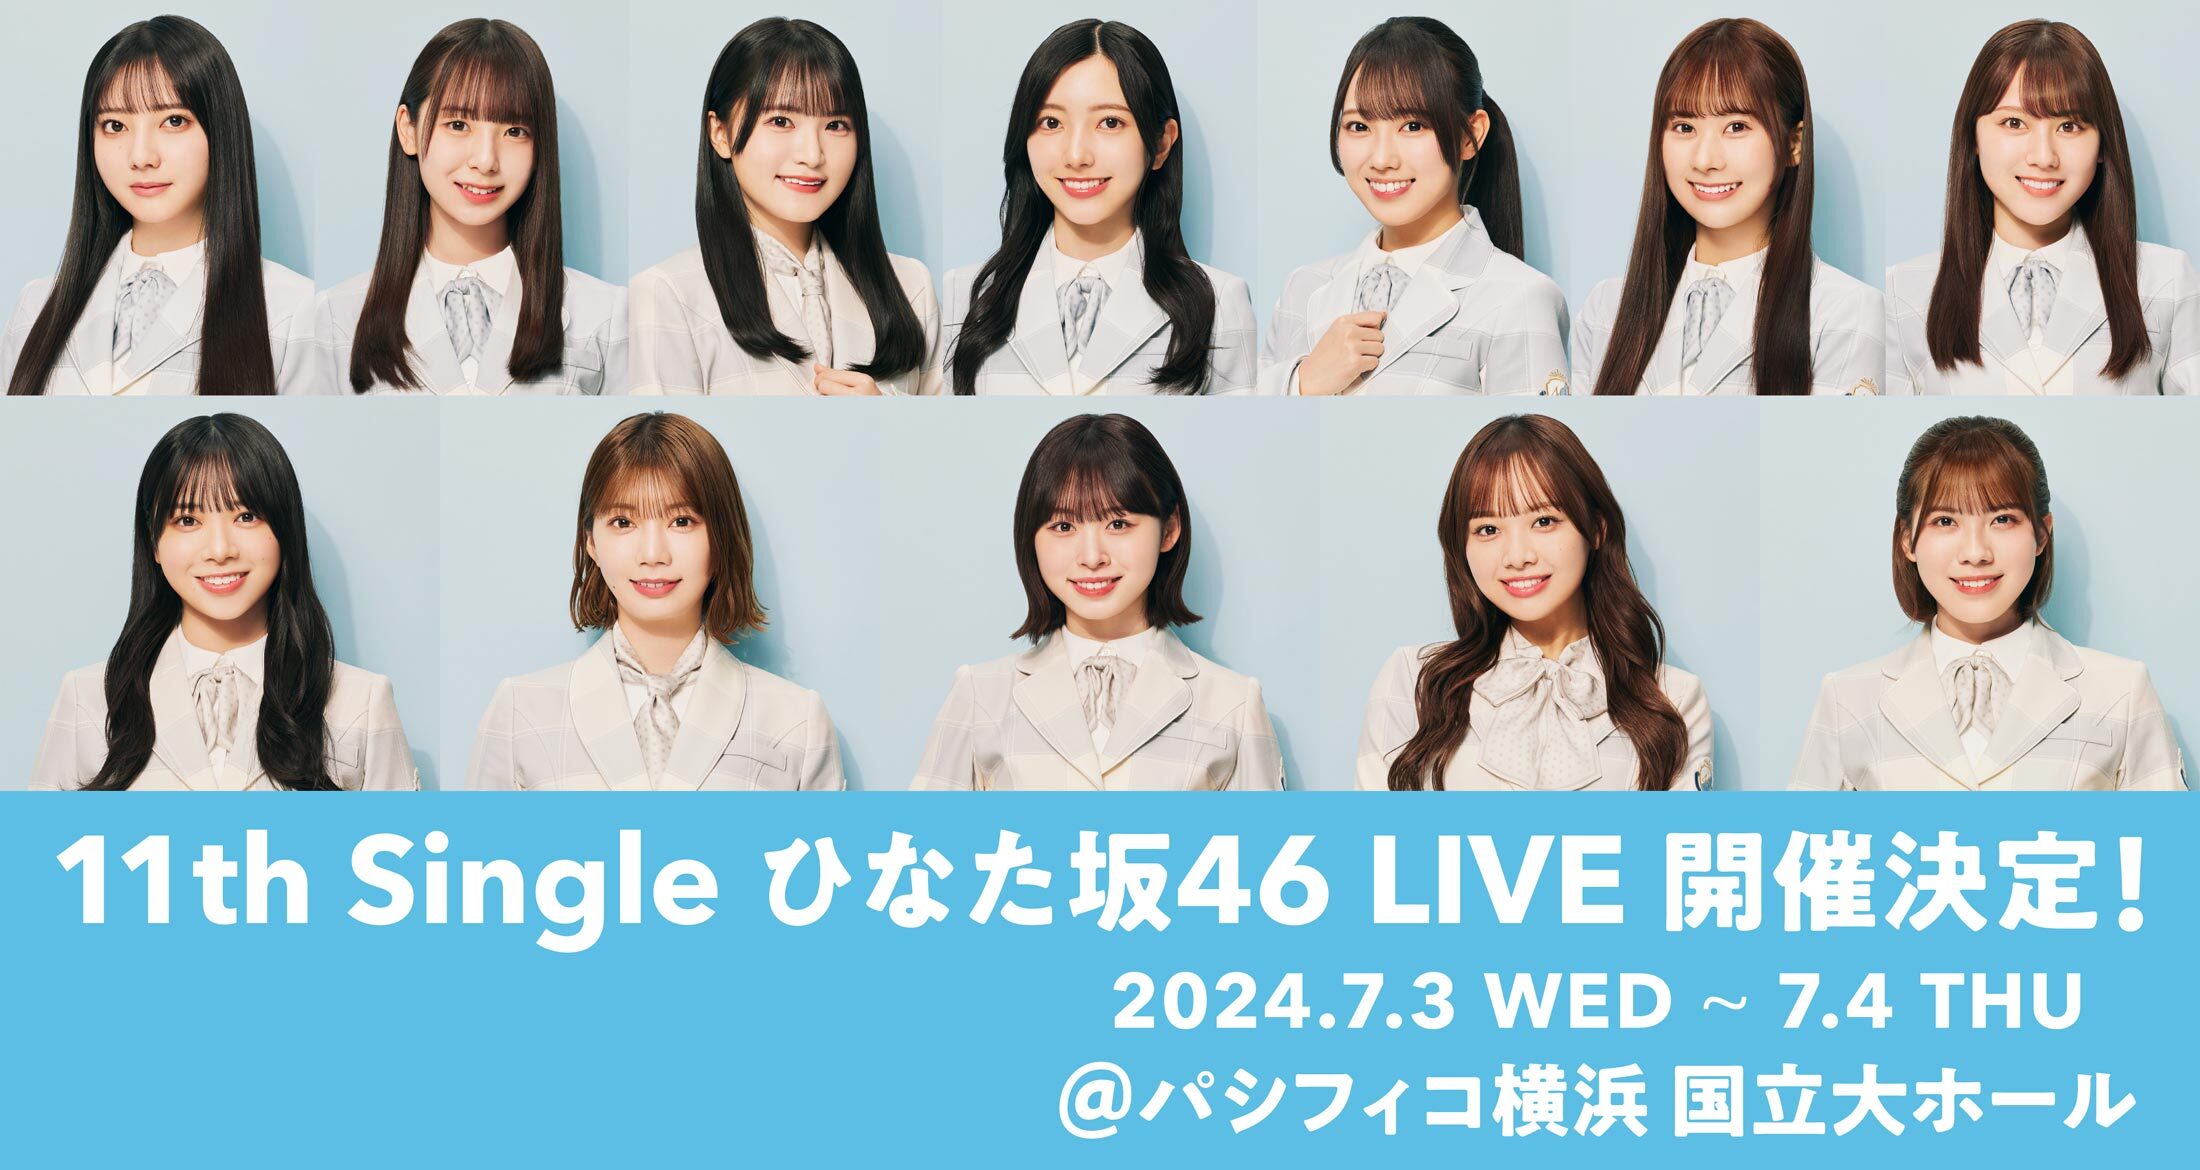 11th Single ひなた坂46 LIVE<br>SPECIAL SITE